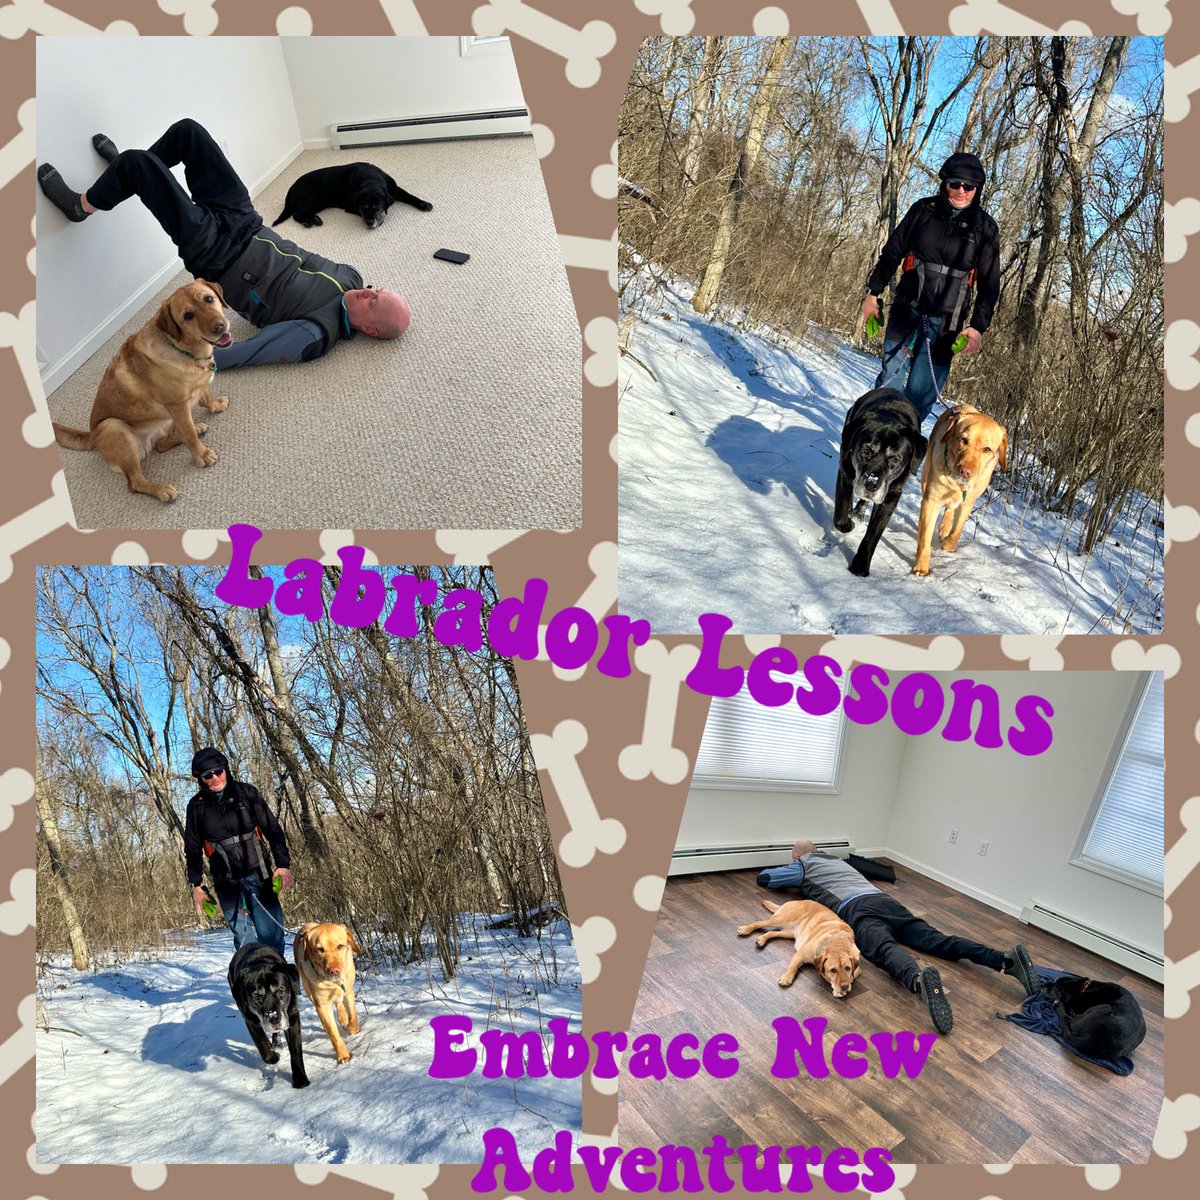 #LabradorLesson from #FitLabPGH (link below): Embrace new adventures! And if you’re nervous, enlist a trusted friend (or instructor) to guide you!

#2024Goals #TrySomethingNew #AdventureAwaits #JustMove #MoveMore 

tinyurl.com/FLP-AdventureL…